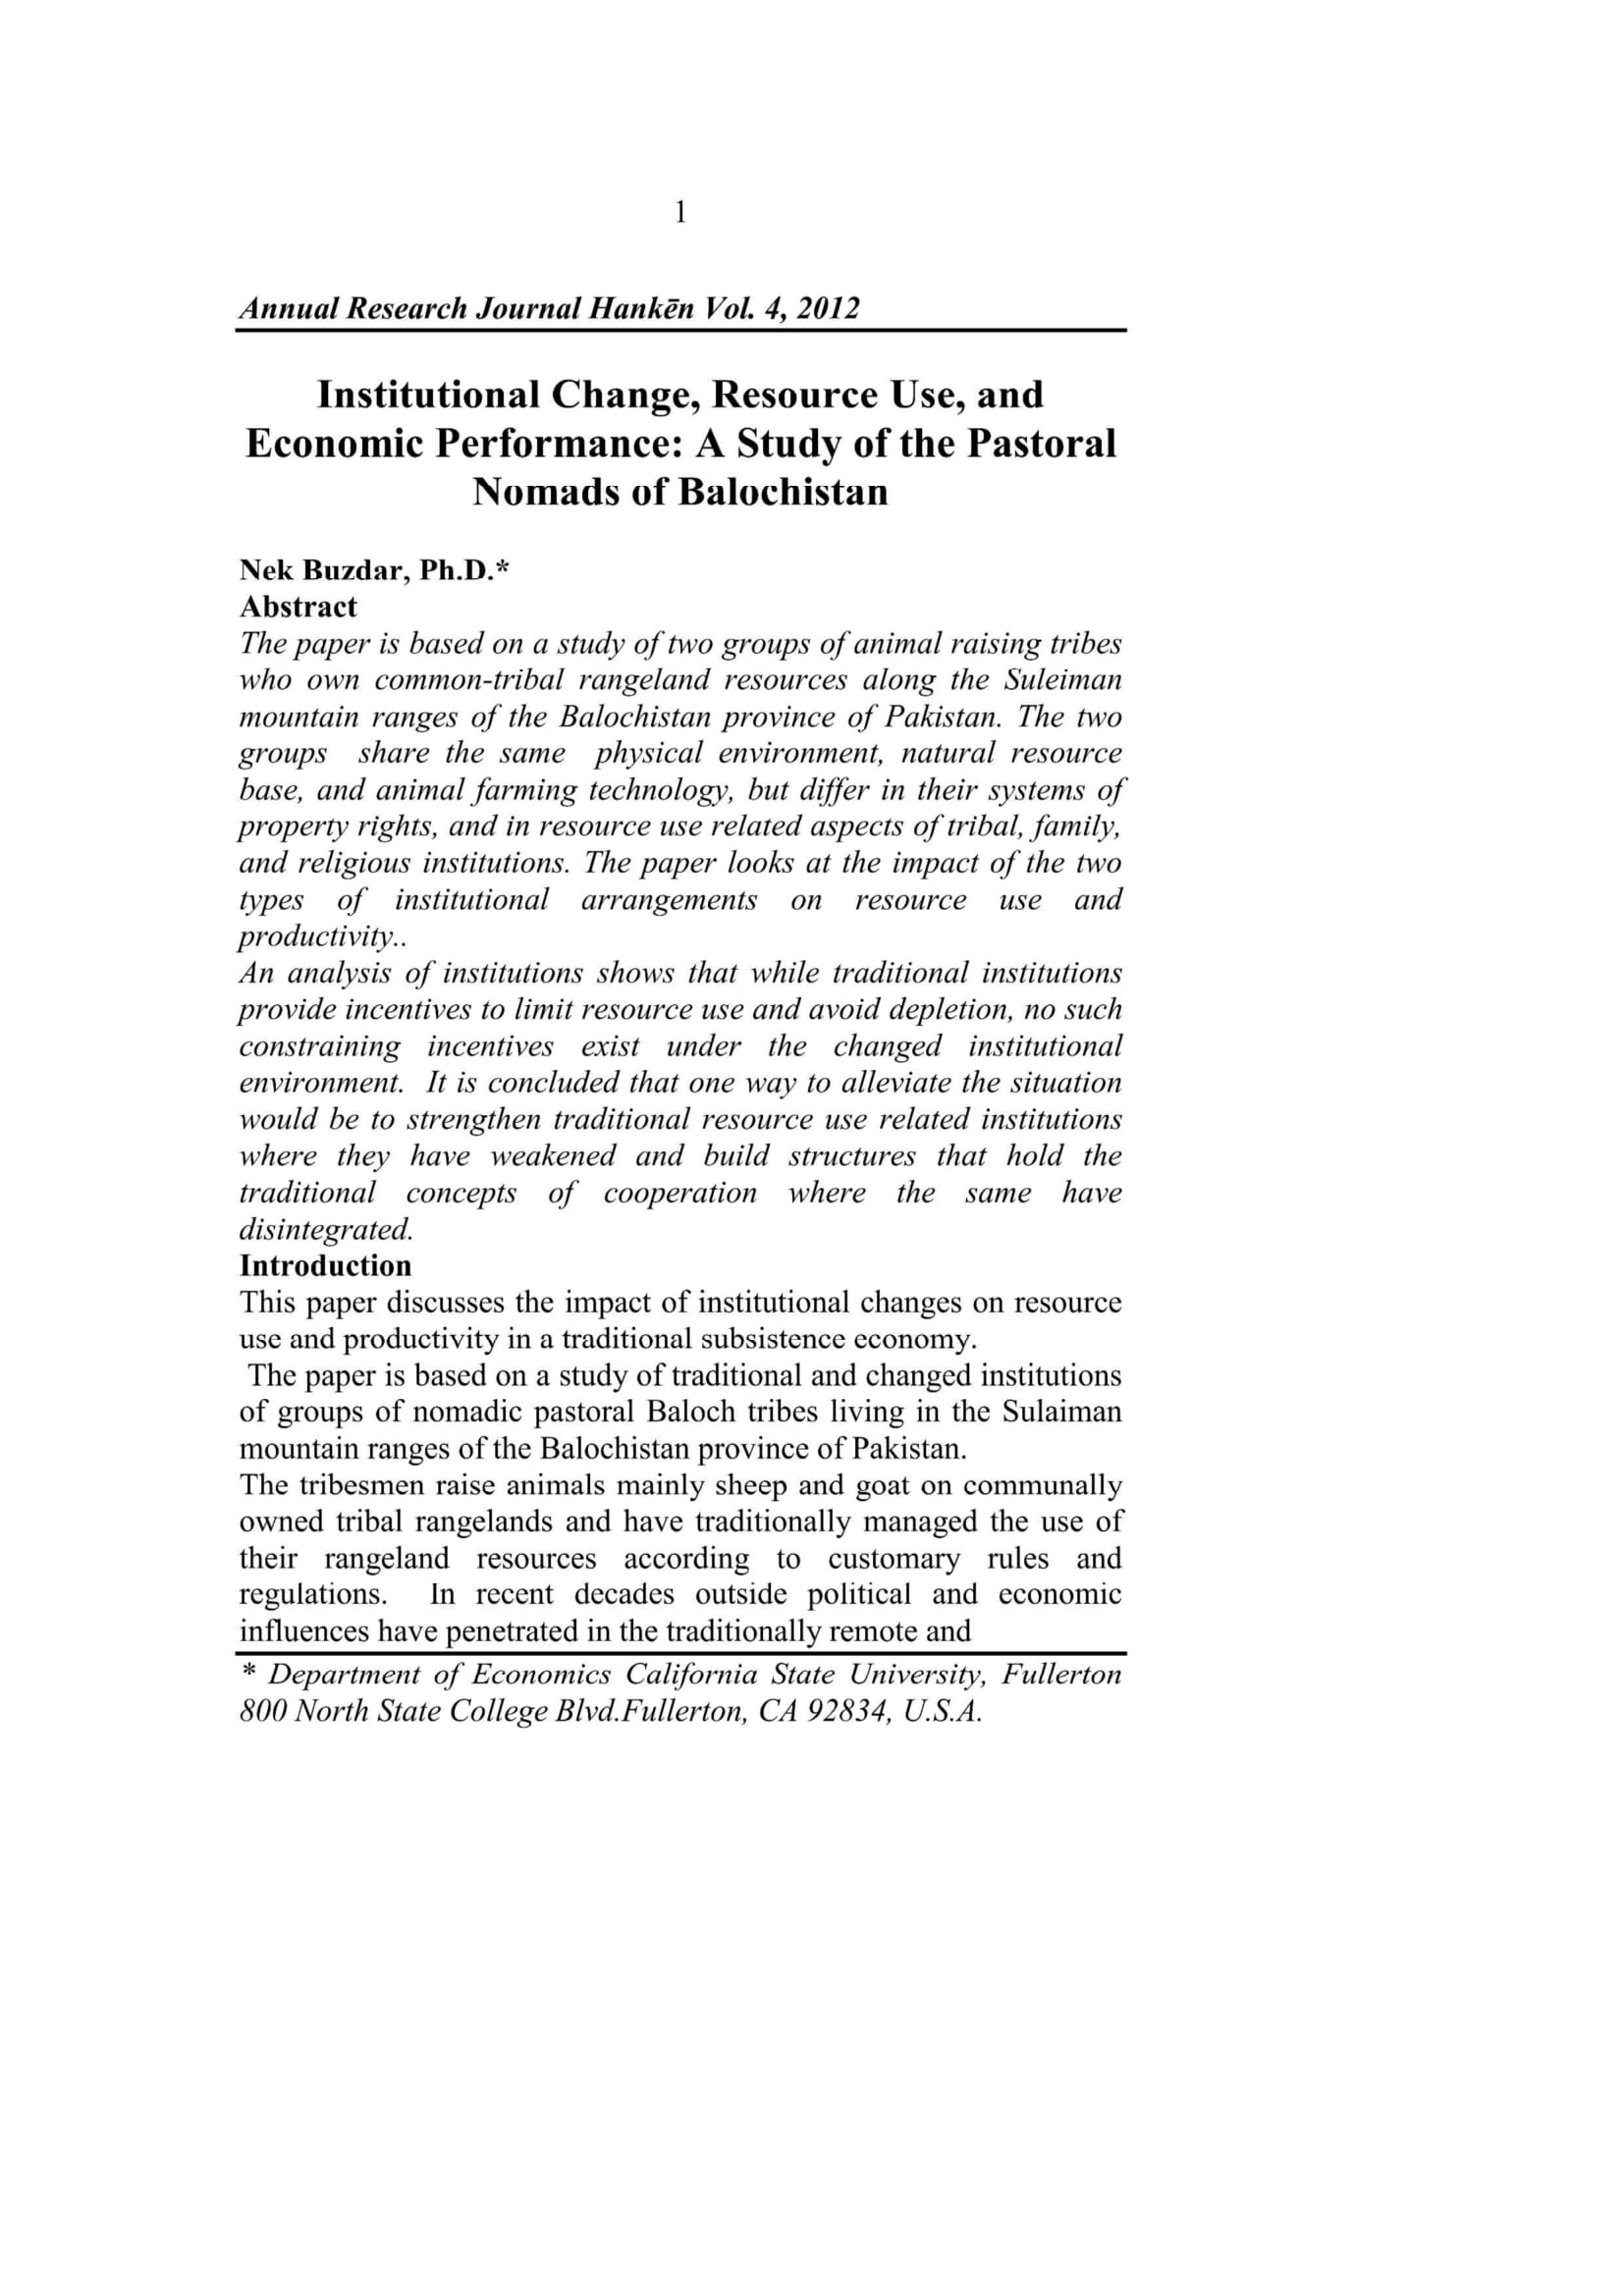 Institutional Change, Resource Use, and Economic Performance: A Study of the Pastoral Nomads of Balochistan